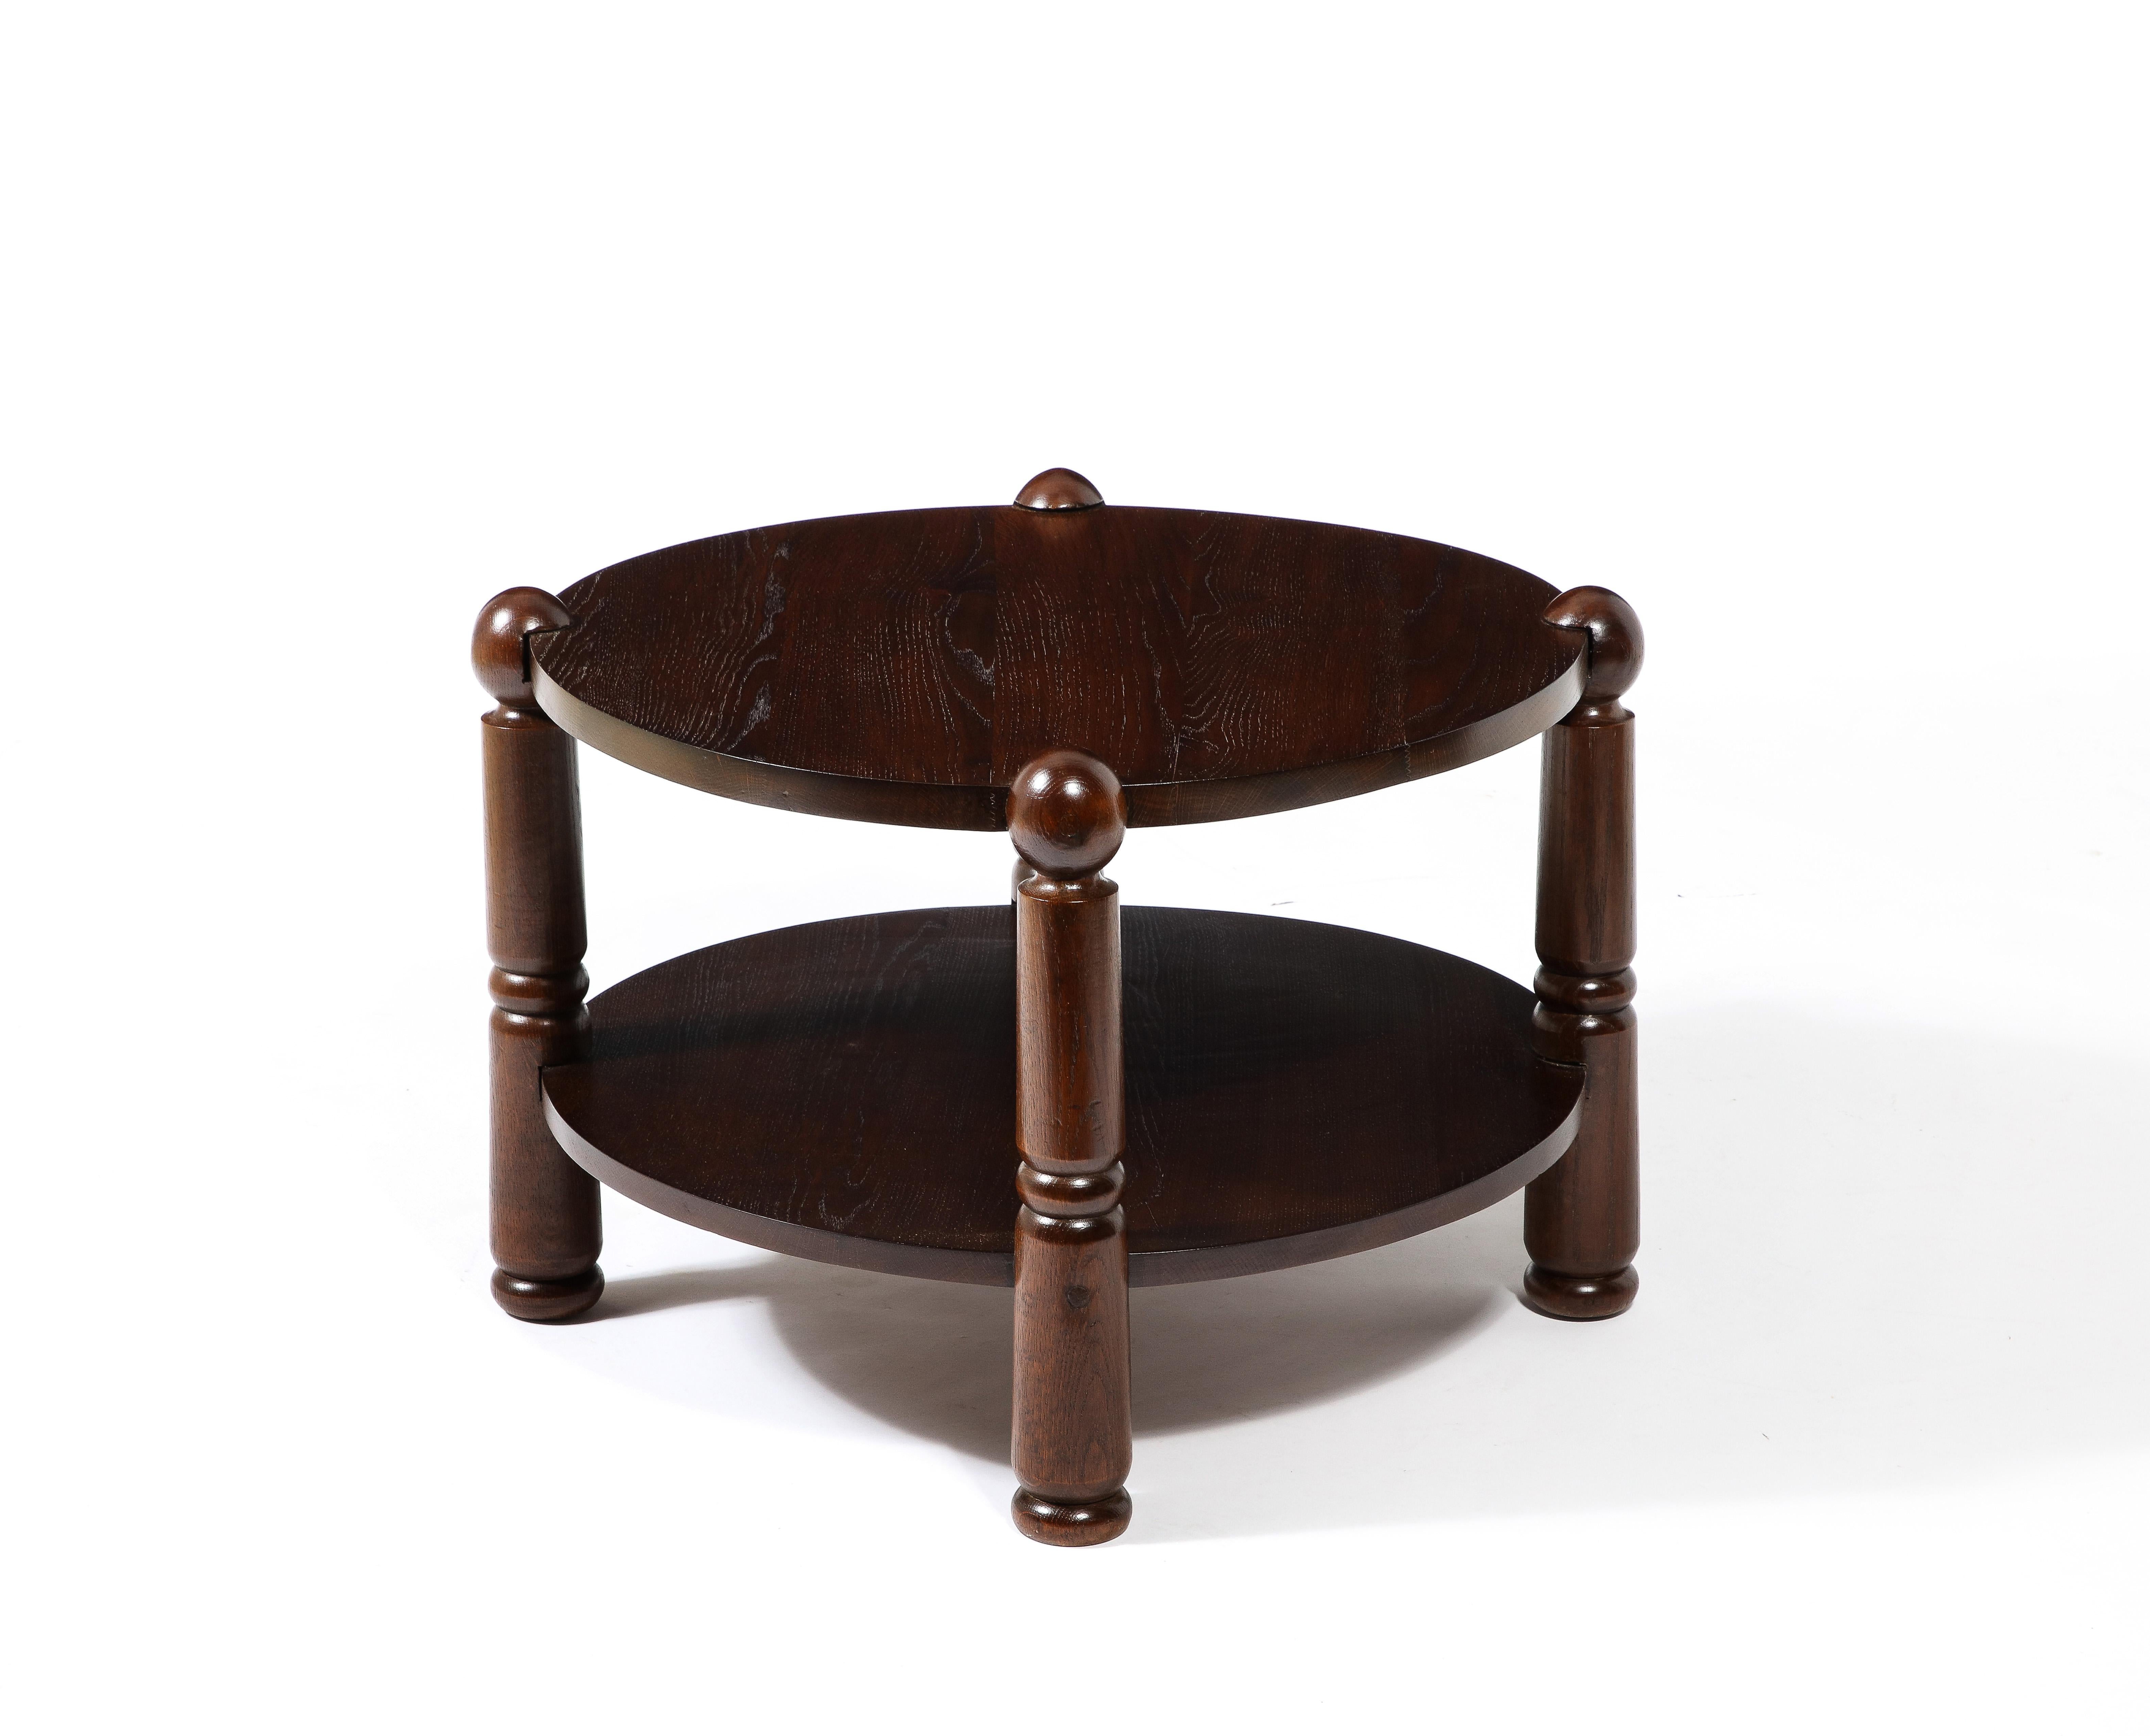 Solid oak side table with ringed pin legs; the levels are encased in the legs. Reminiscent of the 